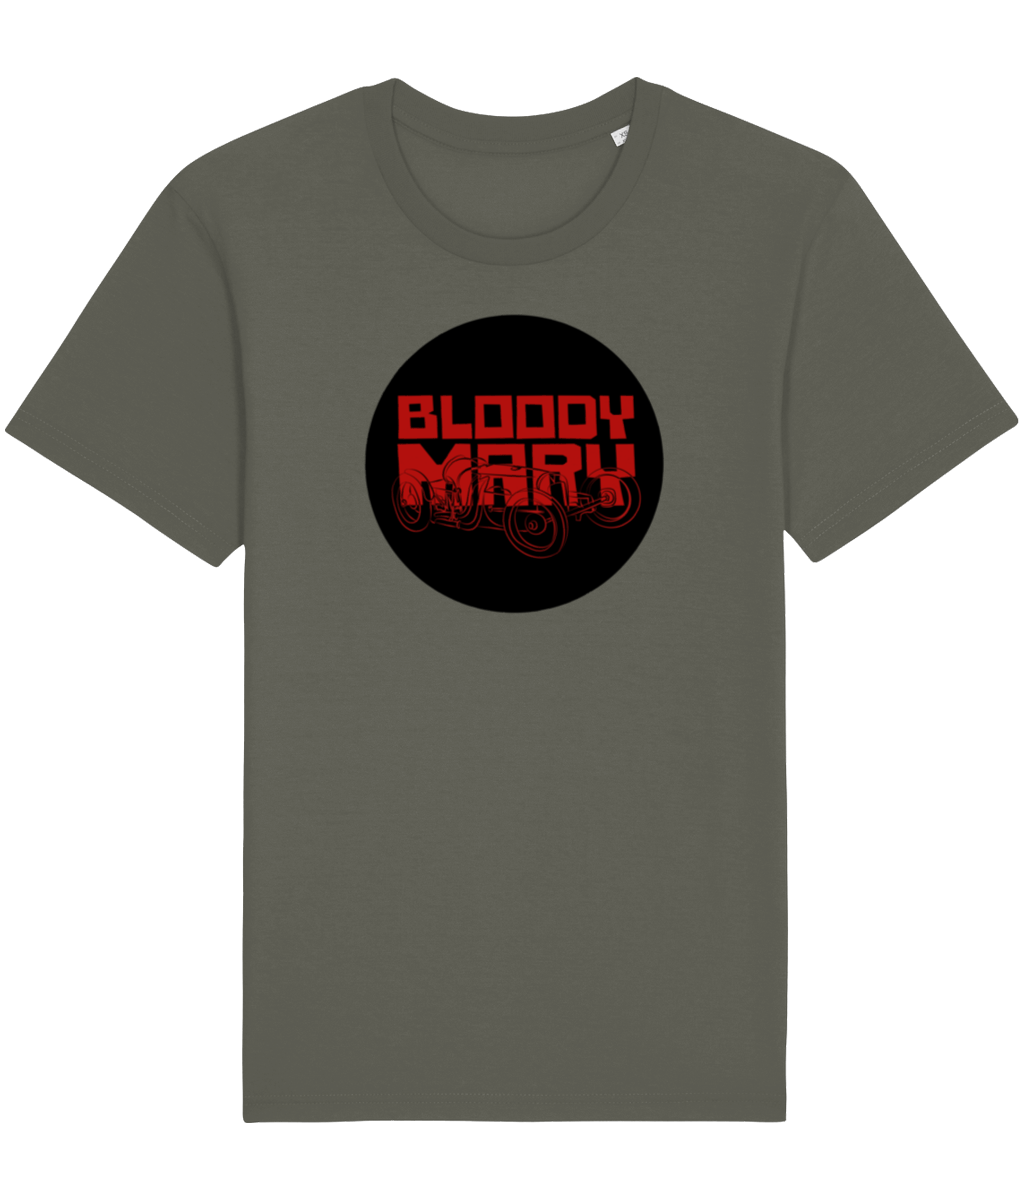 'Bloody Mary' T-Shirt